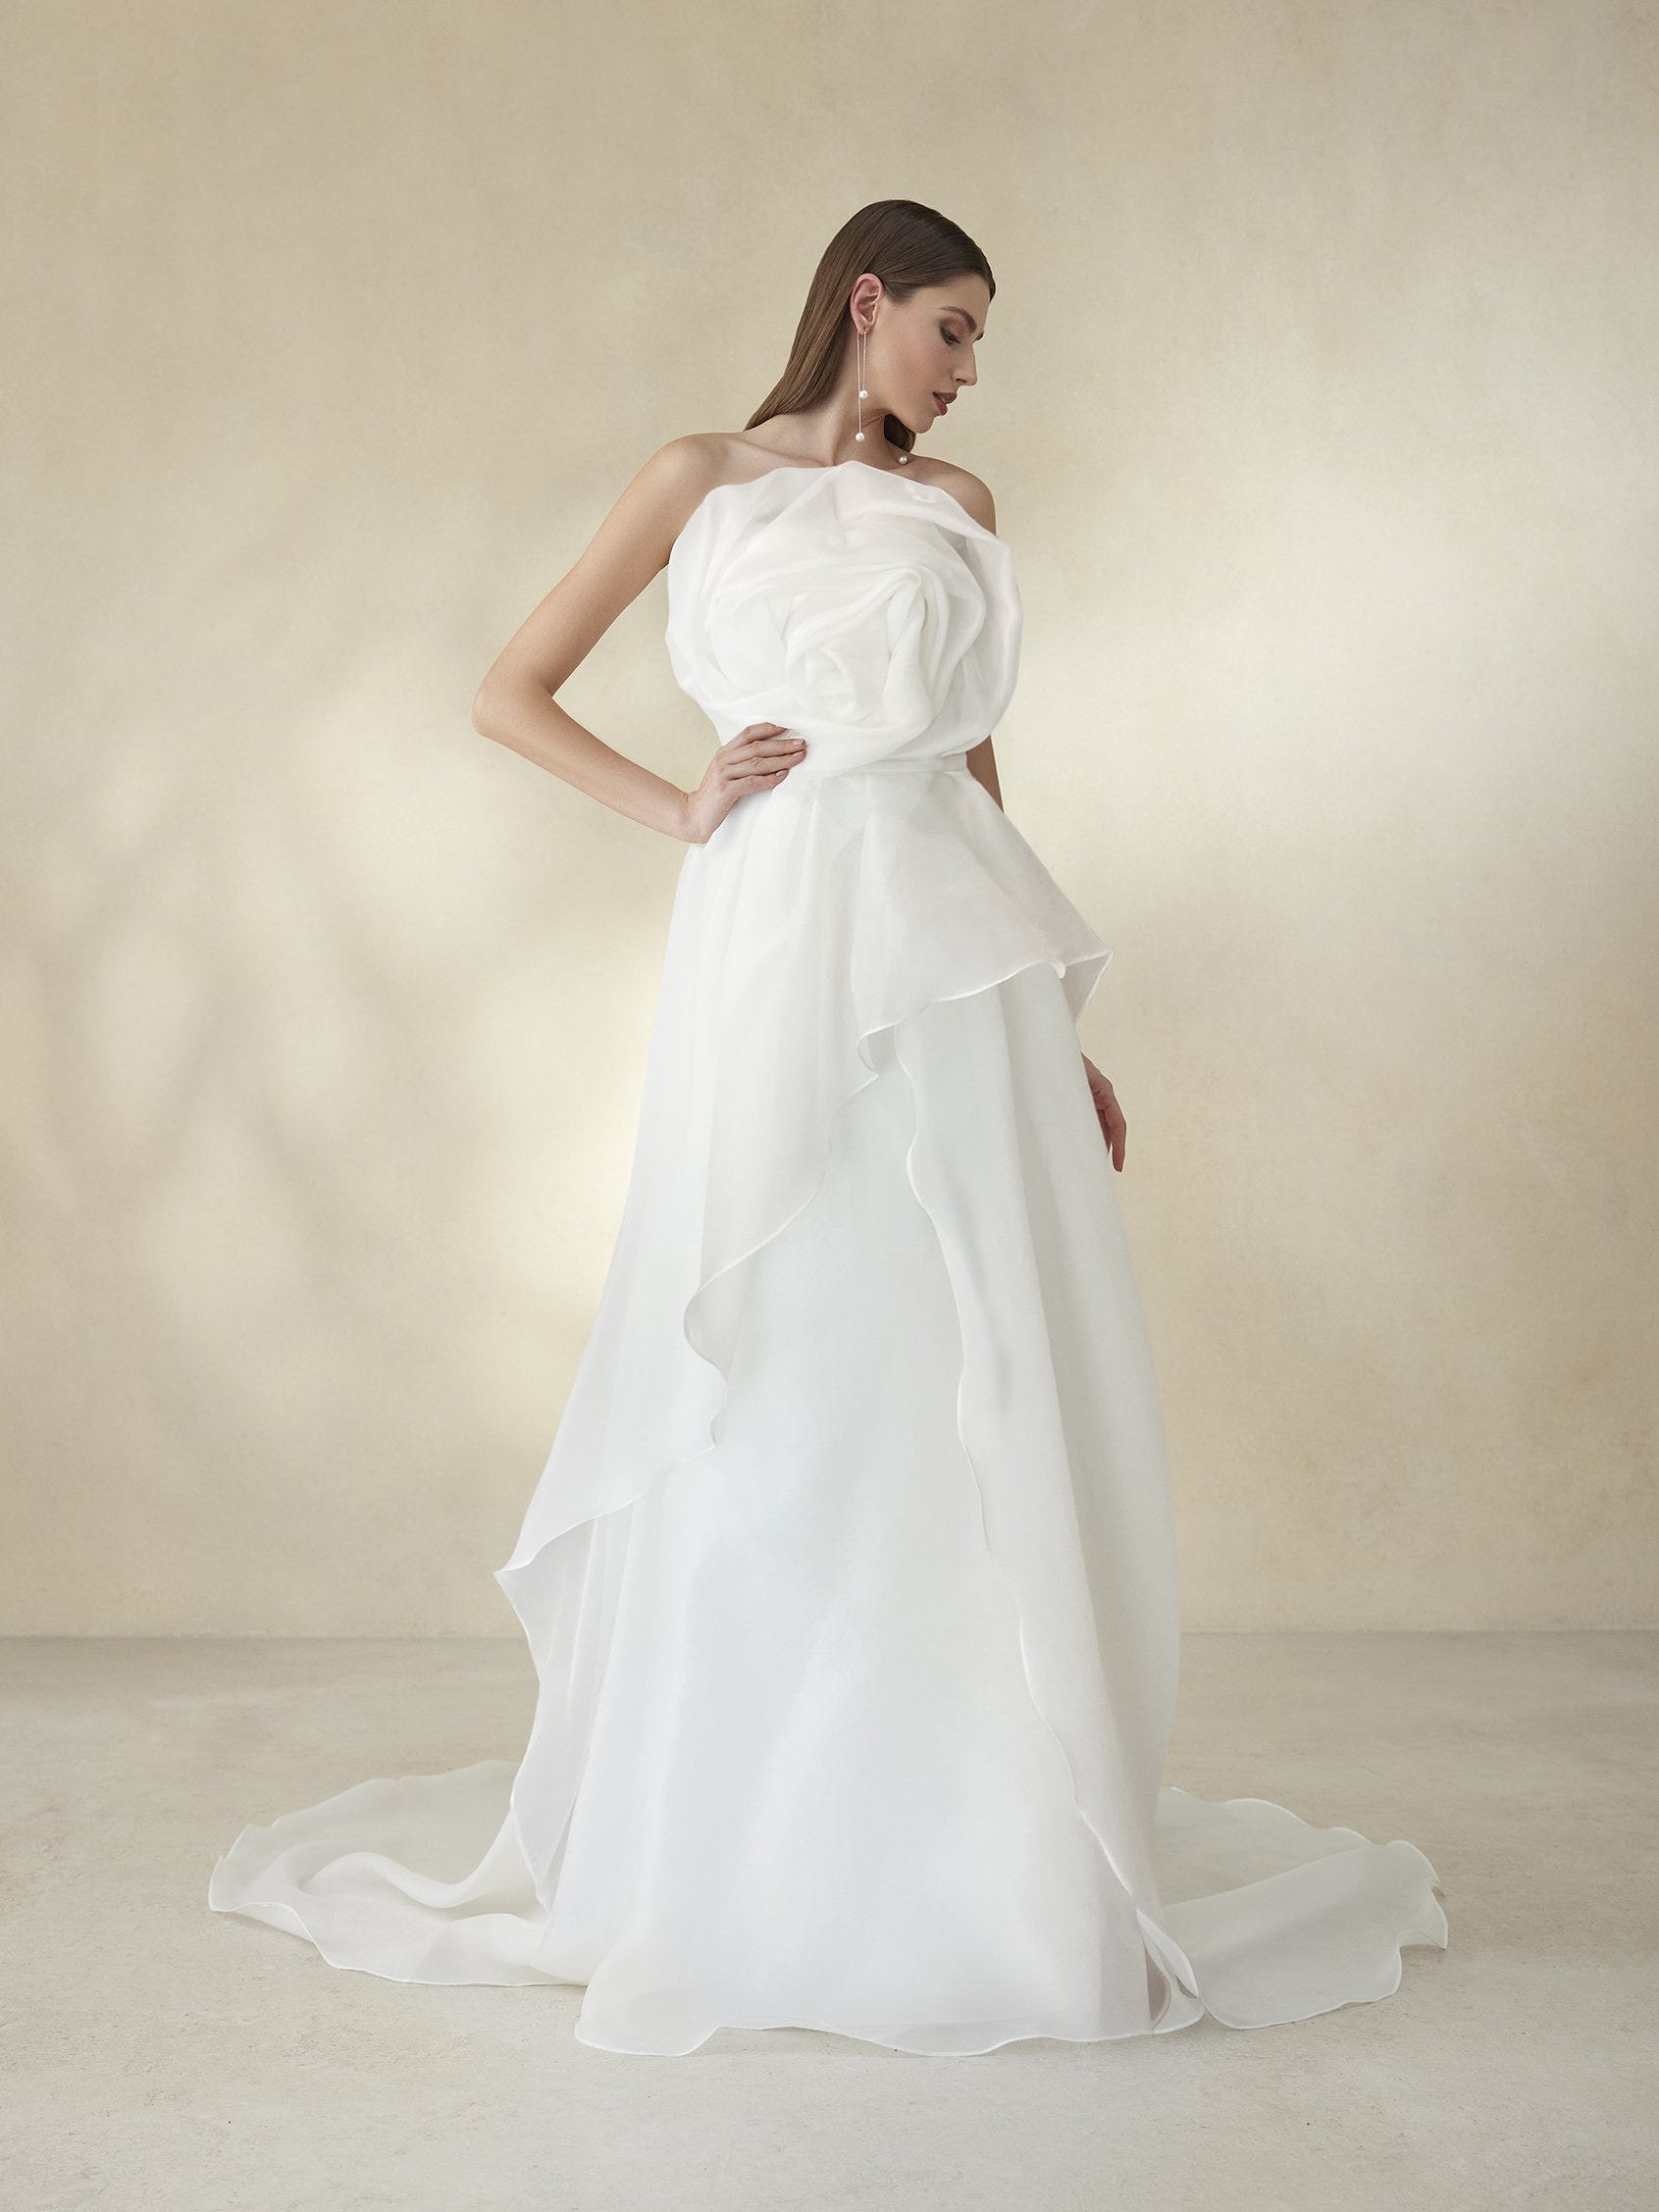 Affordable Bridal Wedding Gown rental in Singapore | The Gown Warehouse